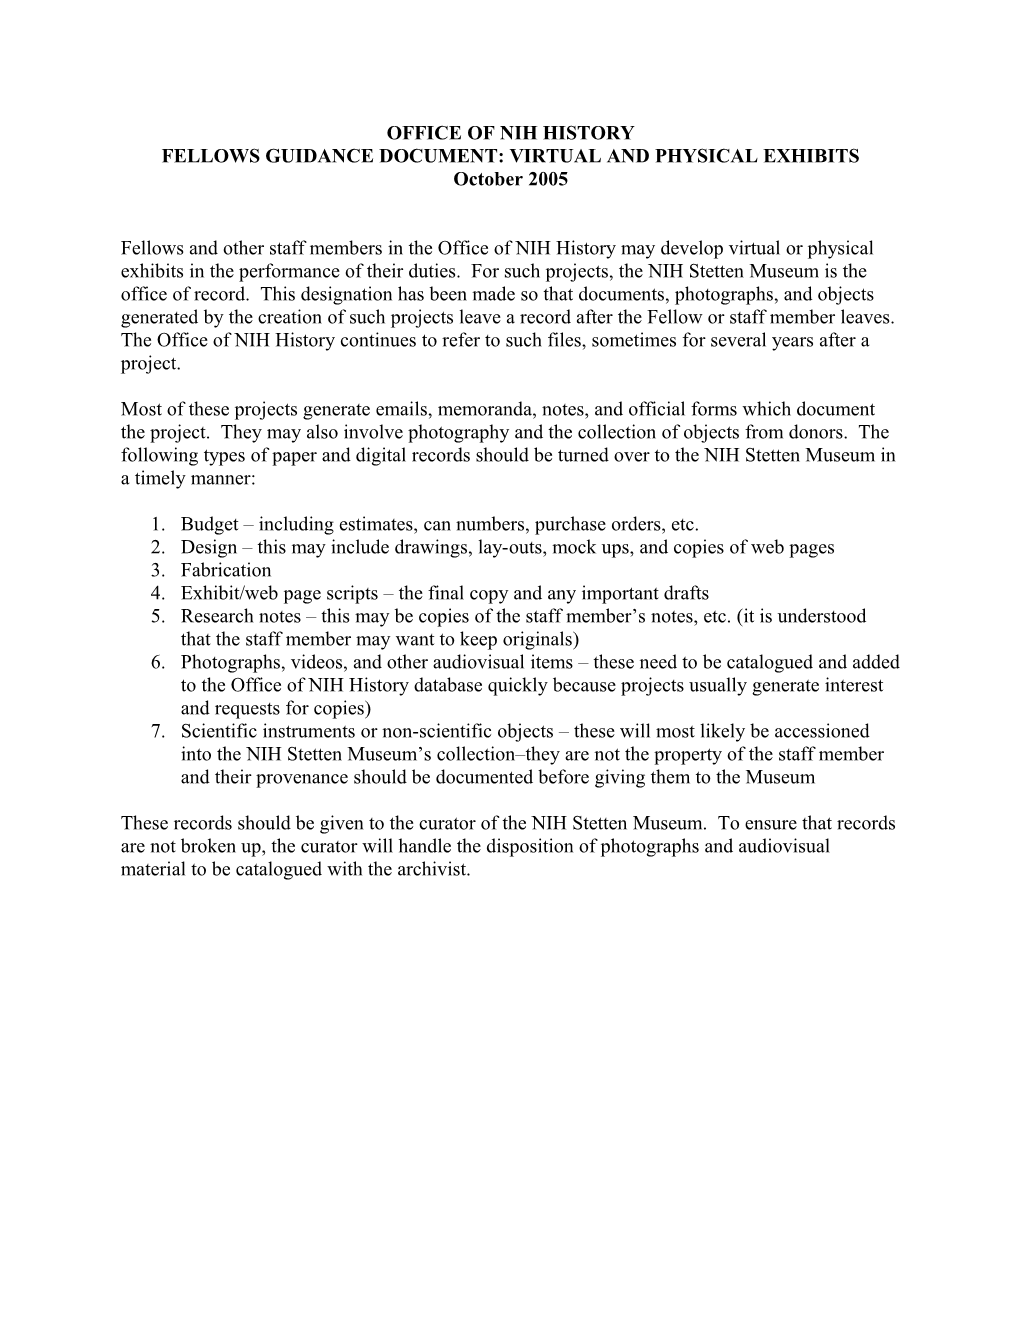 Office of NIH History Fellows Guidance Document